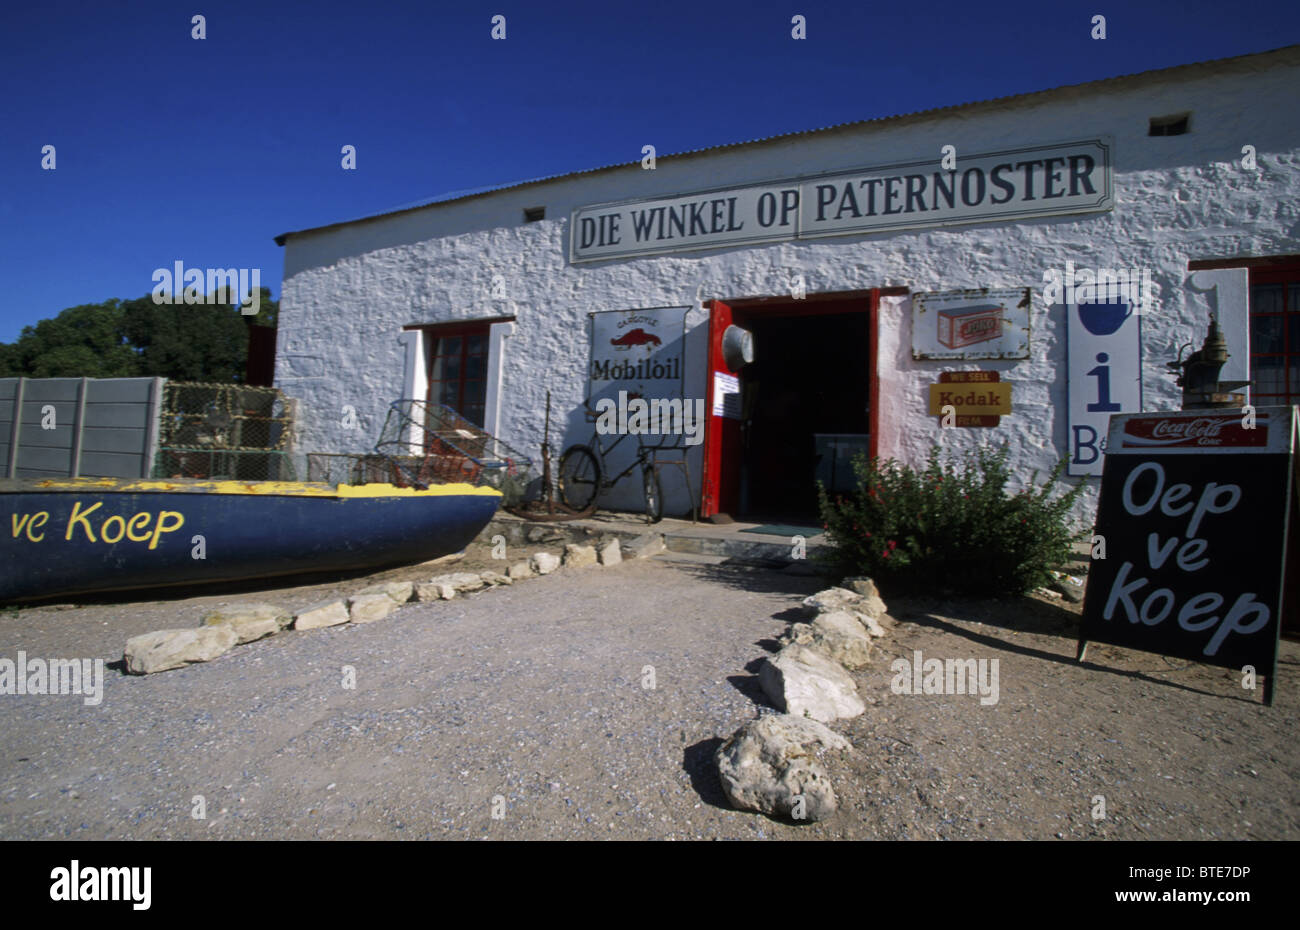 The Paternoster local store in the small fishing village located in an area called the Western Coastal Terrace of South Africa Stock Photo